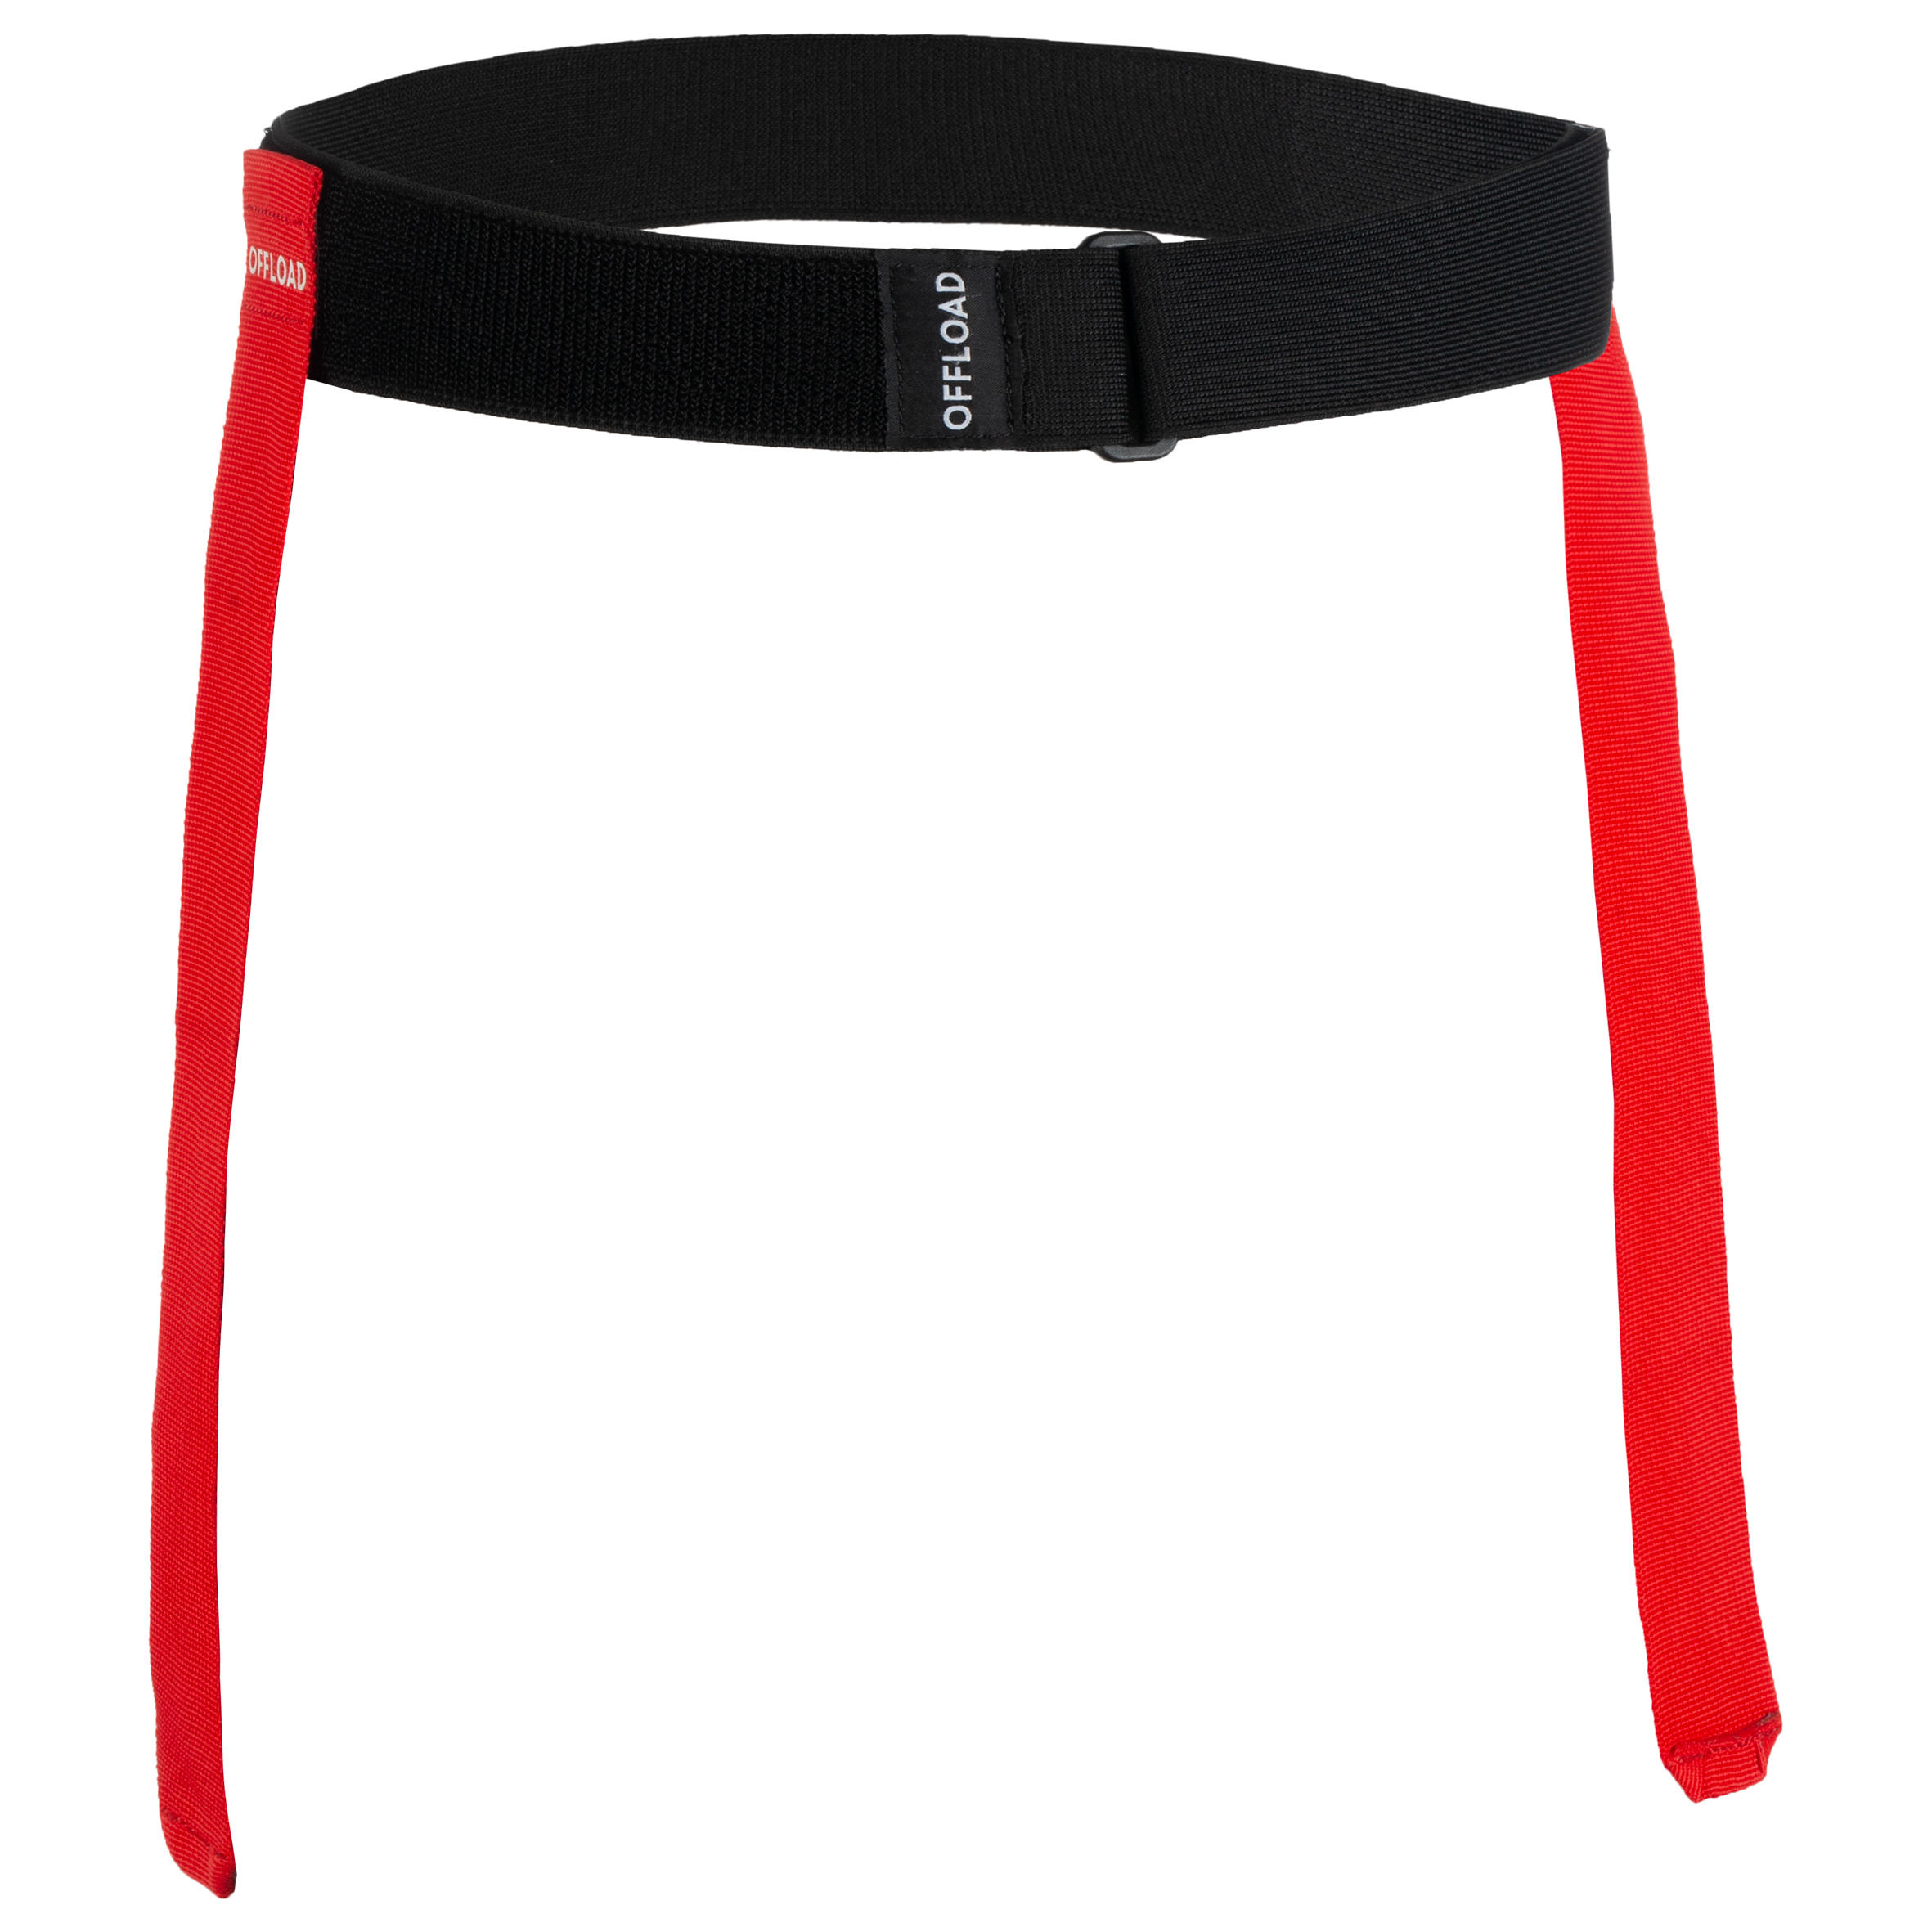 Tag Rugby Belt Kit R500 - Blue/Red 5/10